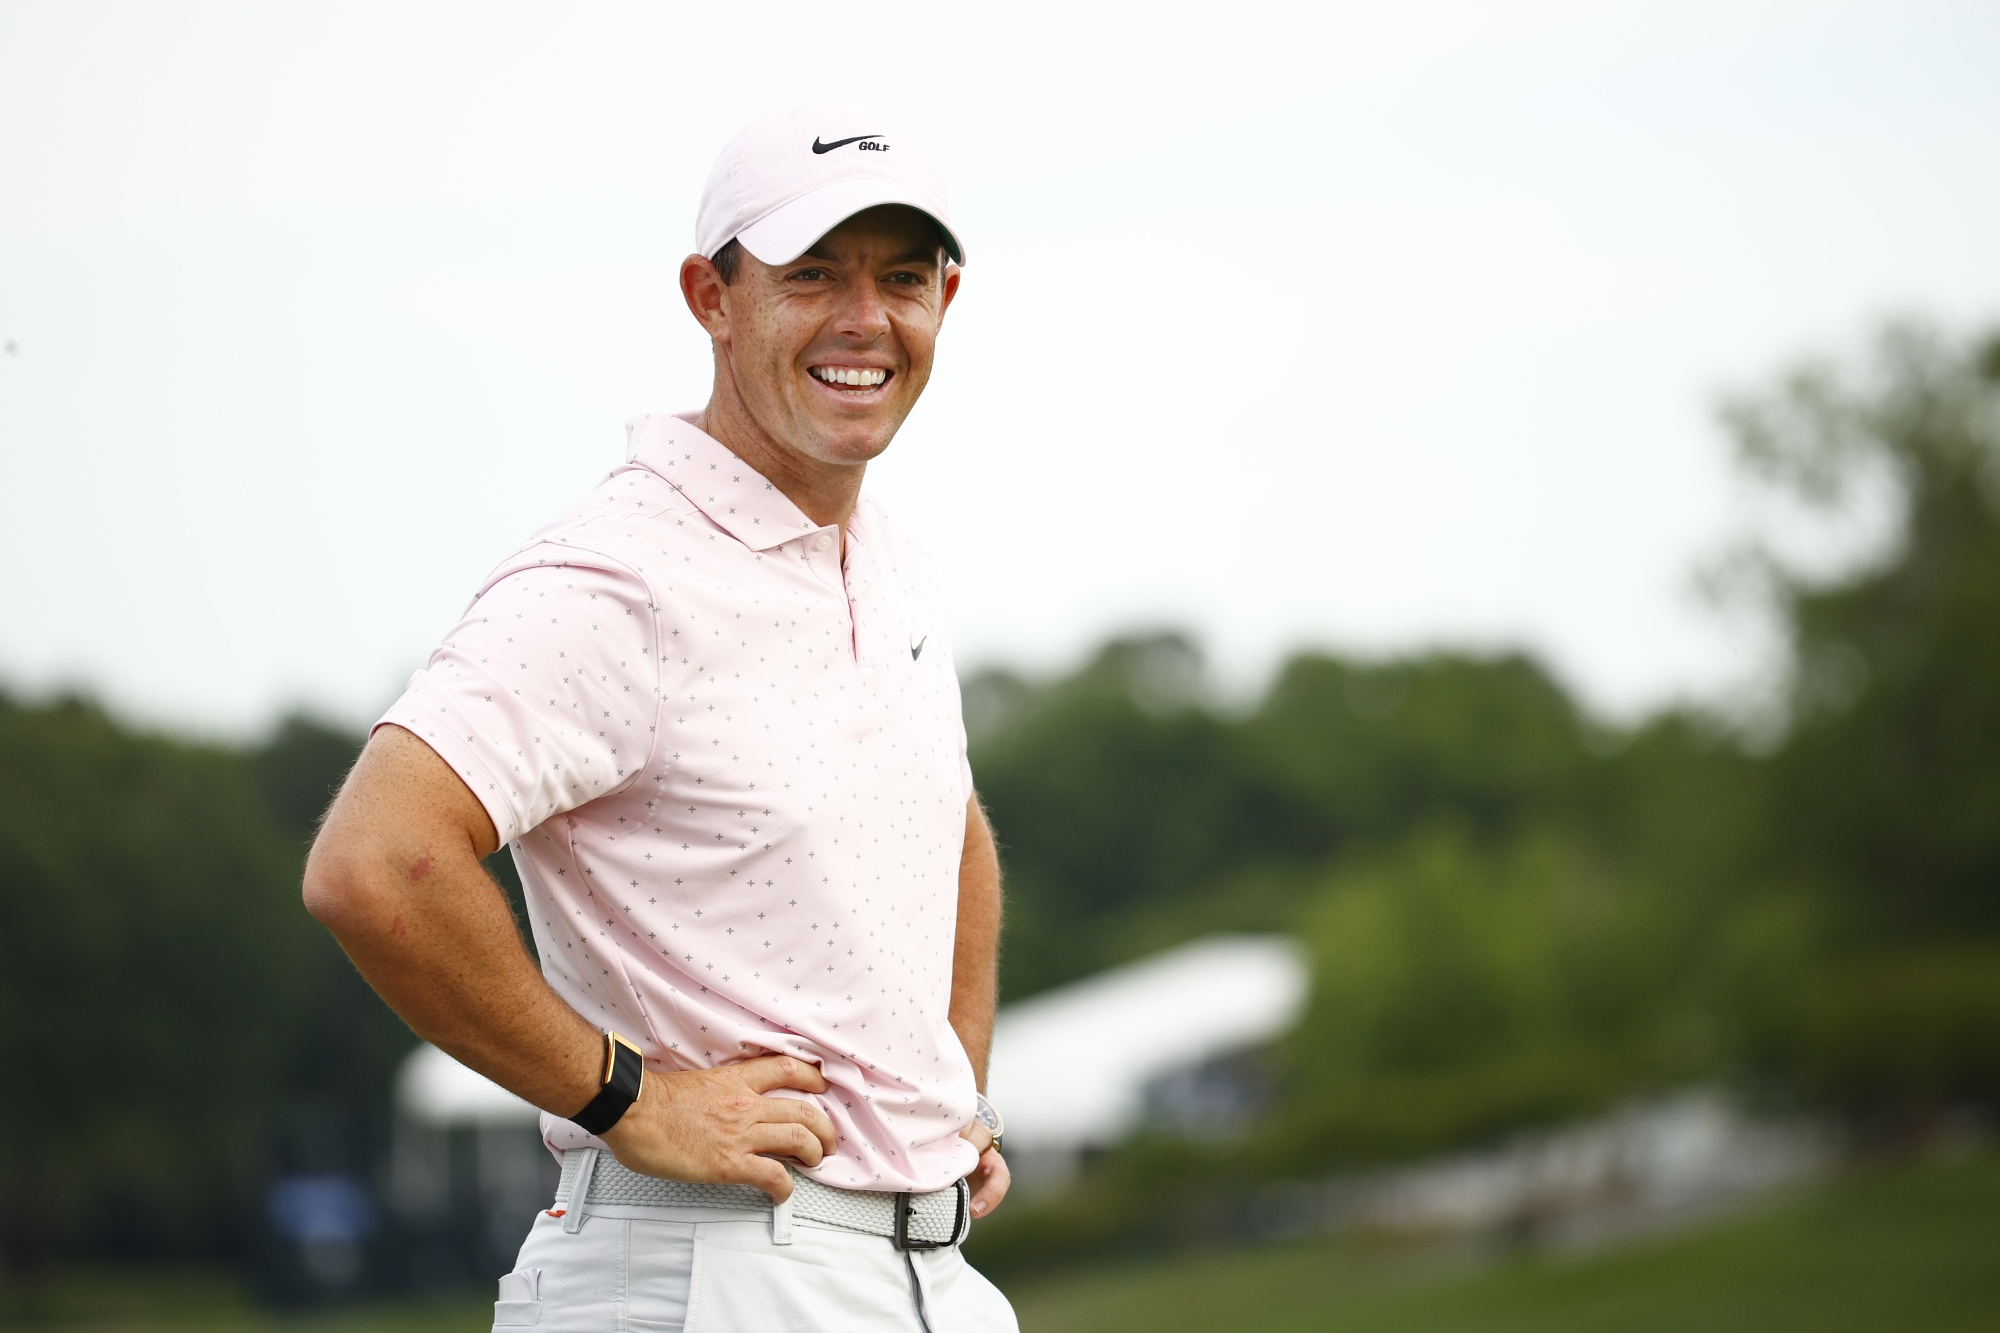 McIlroy Still Hates LIV, But Says PGA Deal Is Good for Sport